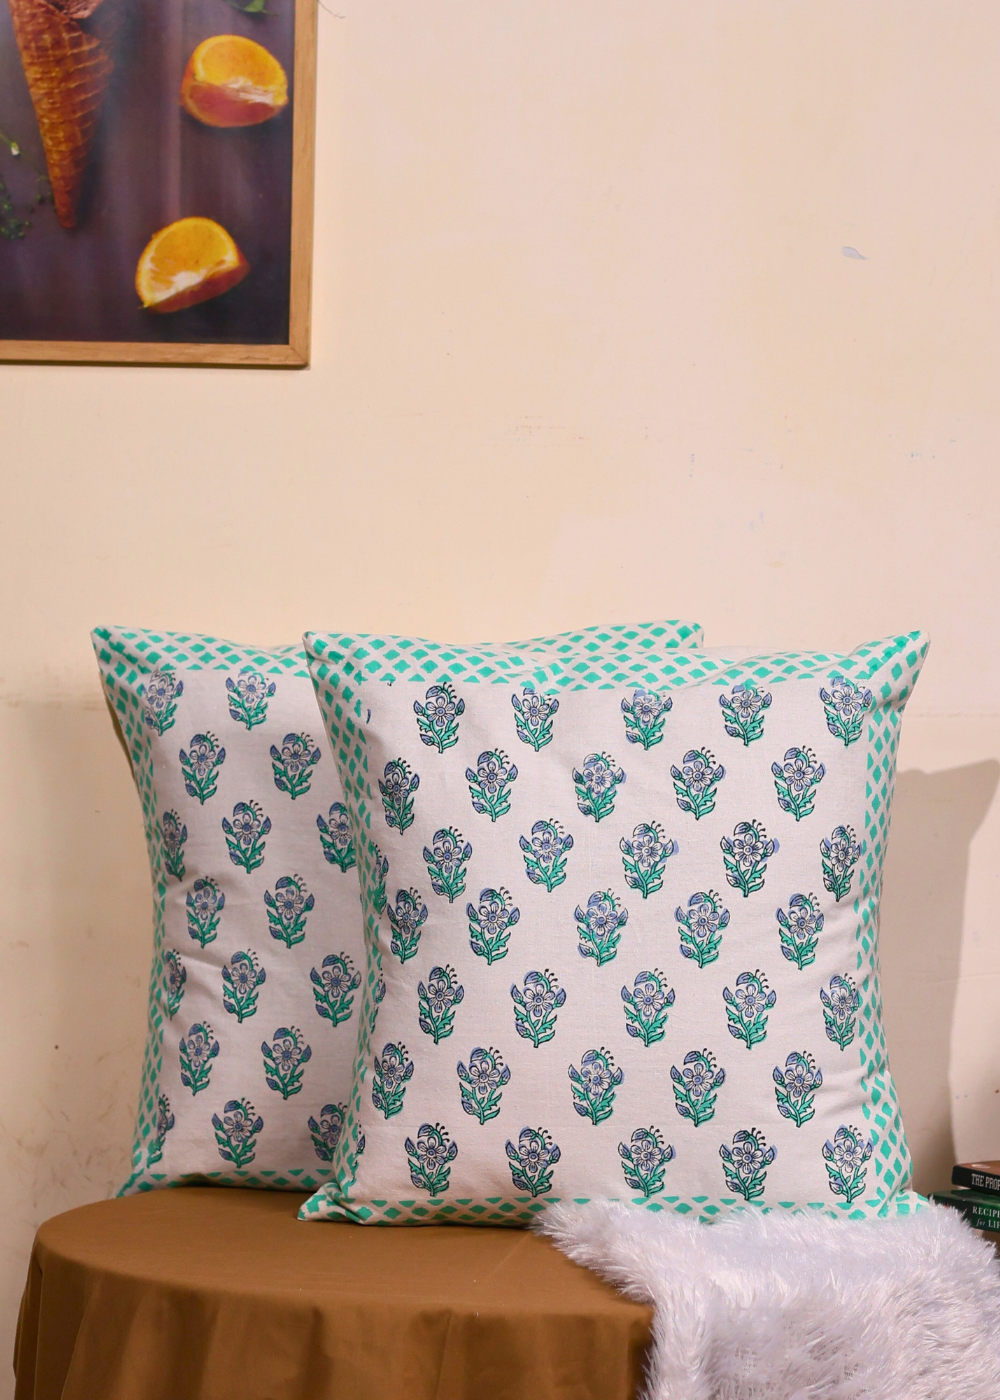 Teal Floral Motif Cushion Cover - set of 2